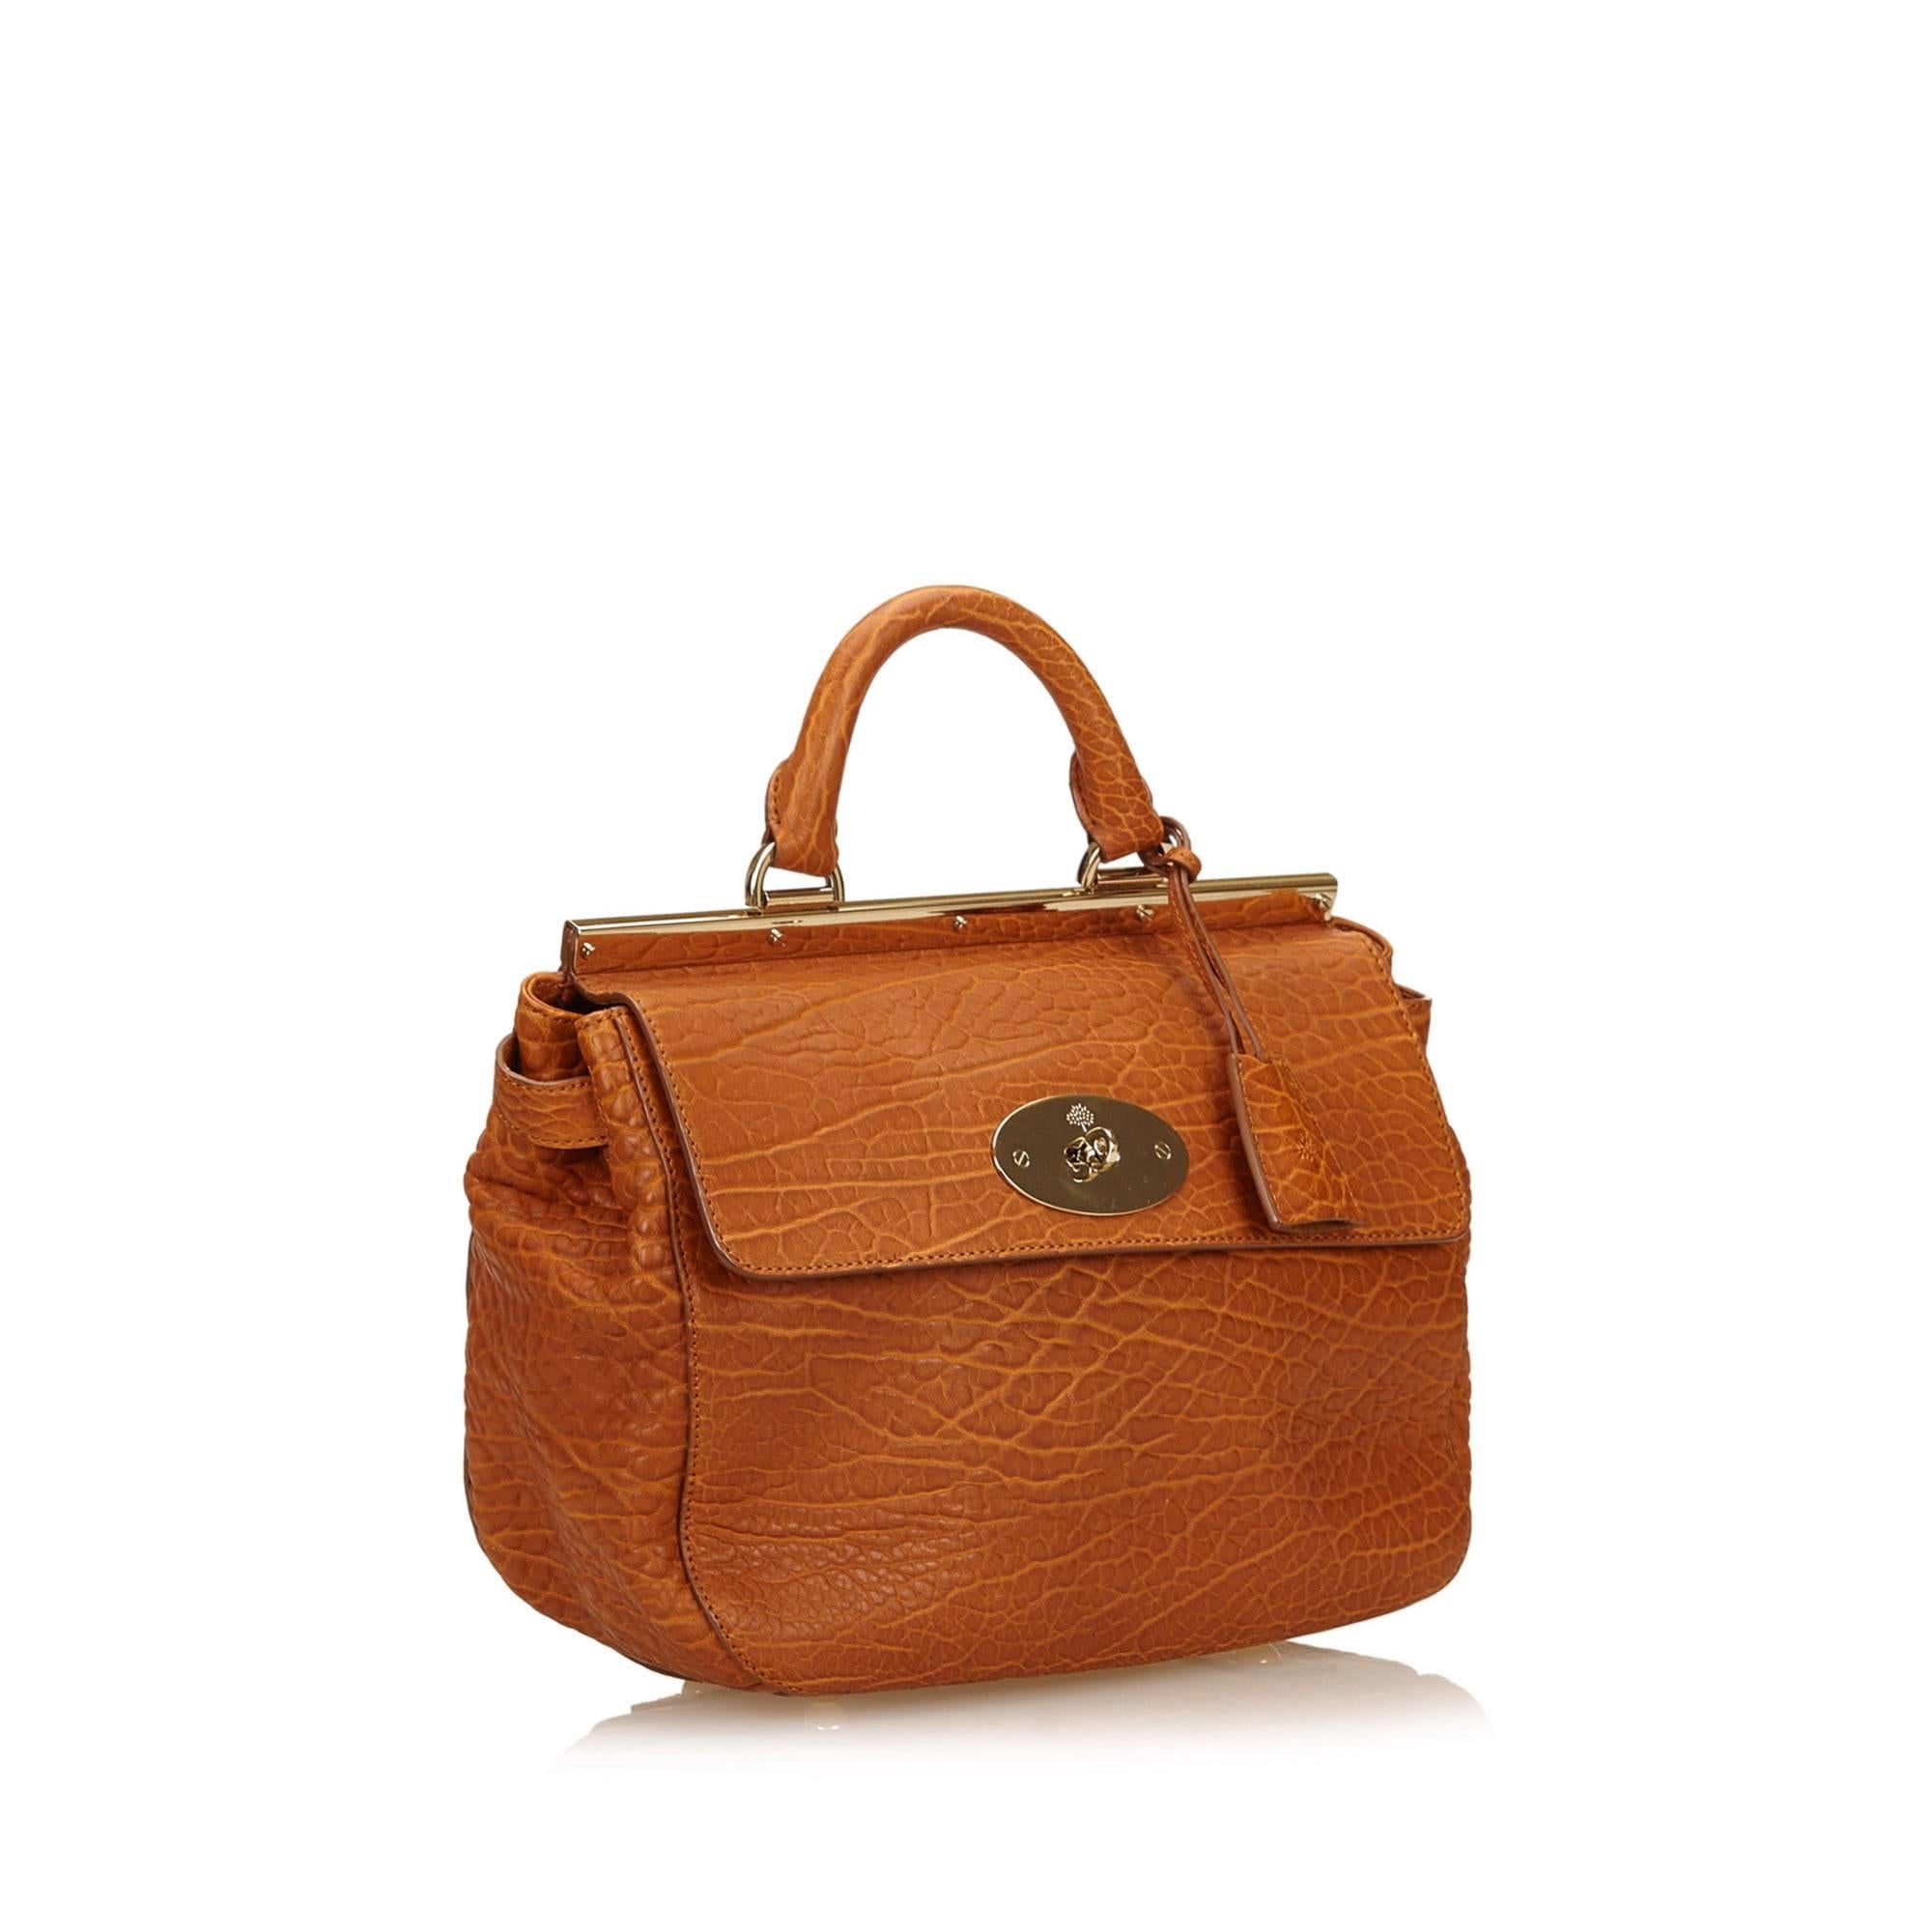 Product details:  Brown embossed leather satchel by Mulberry.  Top carry handle.  Detachable shoulder strap.  Twist-lock closure on front flap.  Lined interior with inner zip pocket.  Protective metal feet.  Goldtone hardware.  12